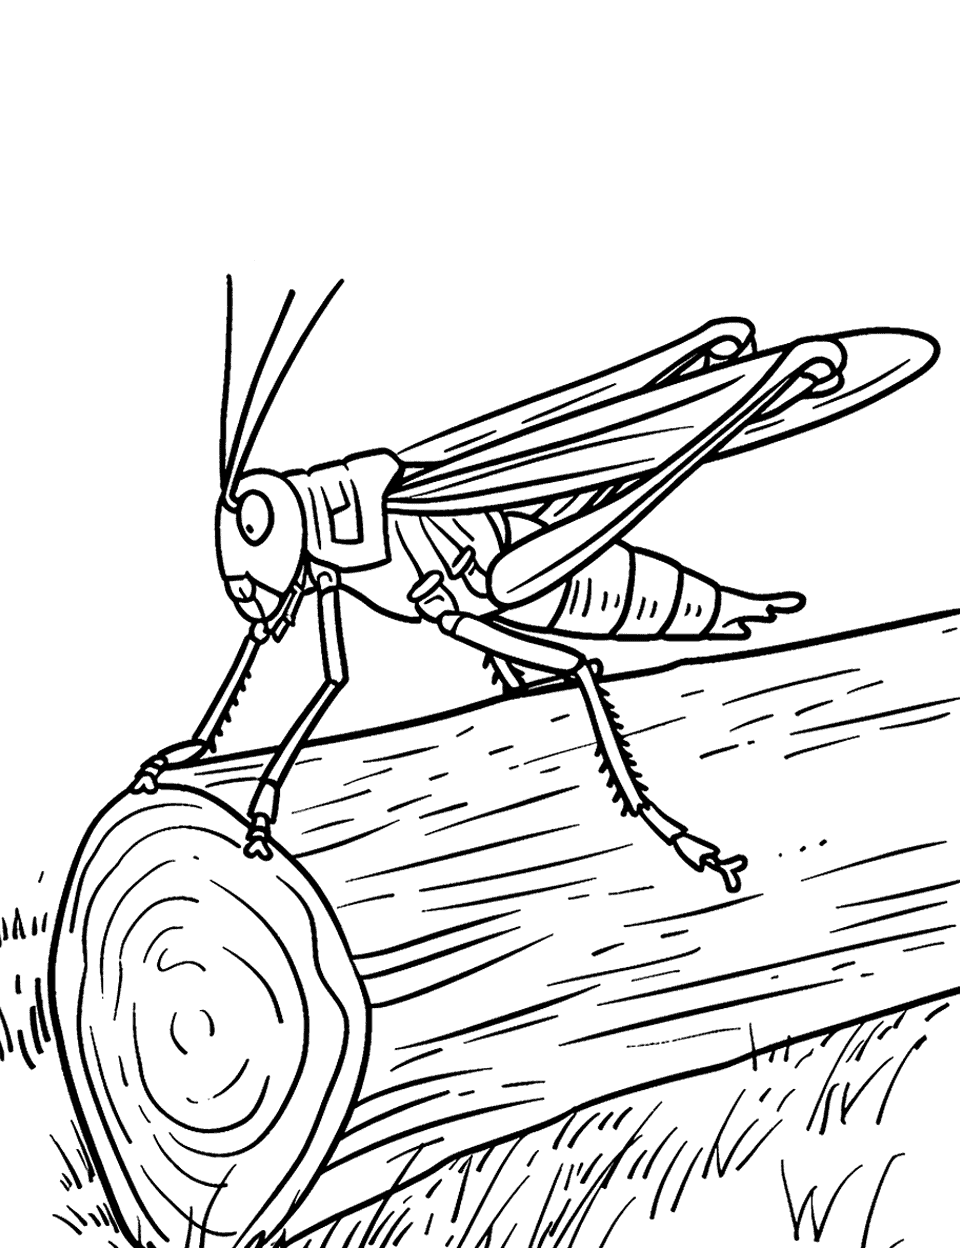 Grasshopper on a Log Insect Coloring Page - A grasshopper on top of a log ready to jump.